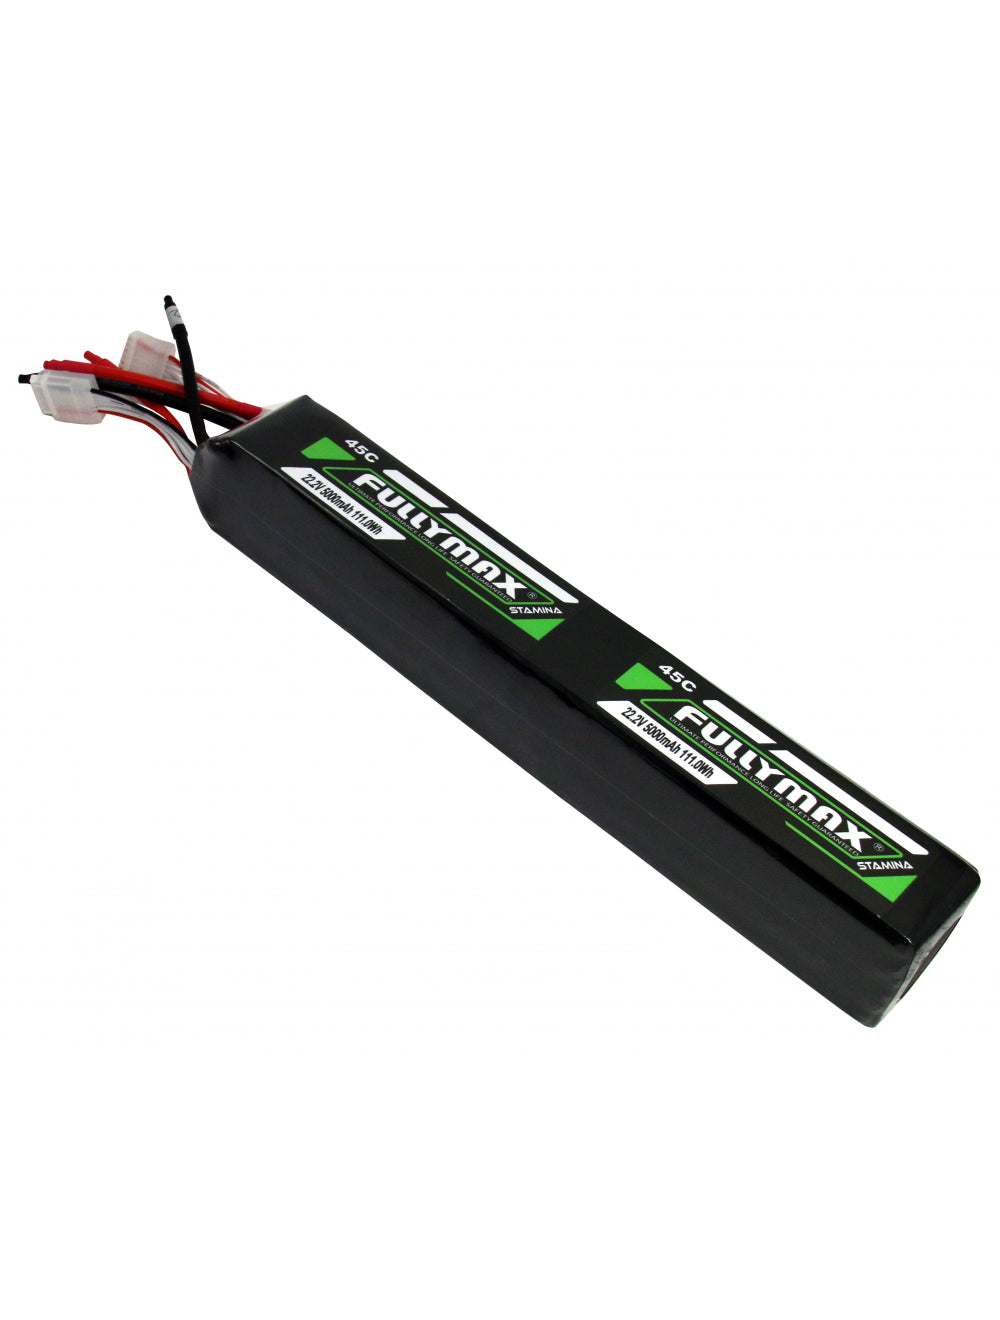 Overlander Fullymax 5000mAh 22.2V (x2) 12S 45C LiPo Battery - Deans Connector 3449